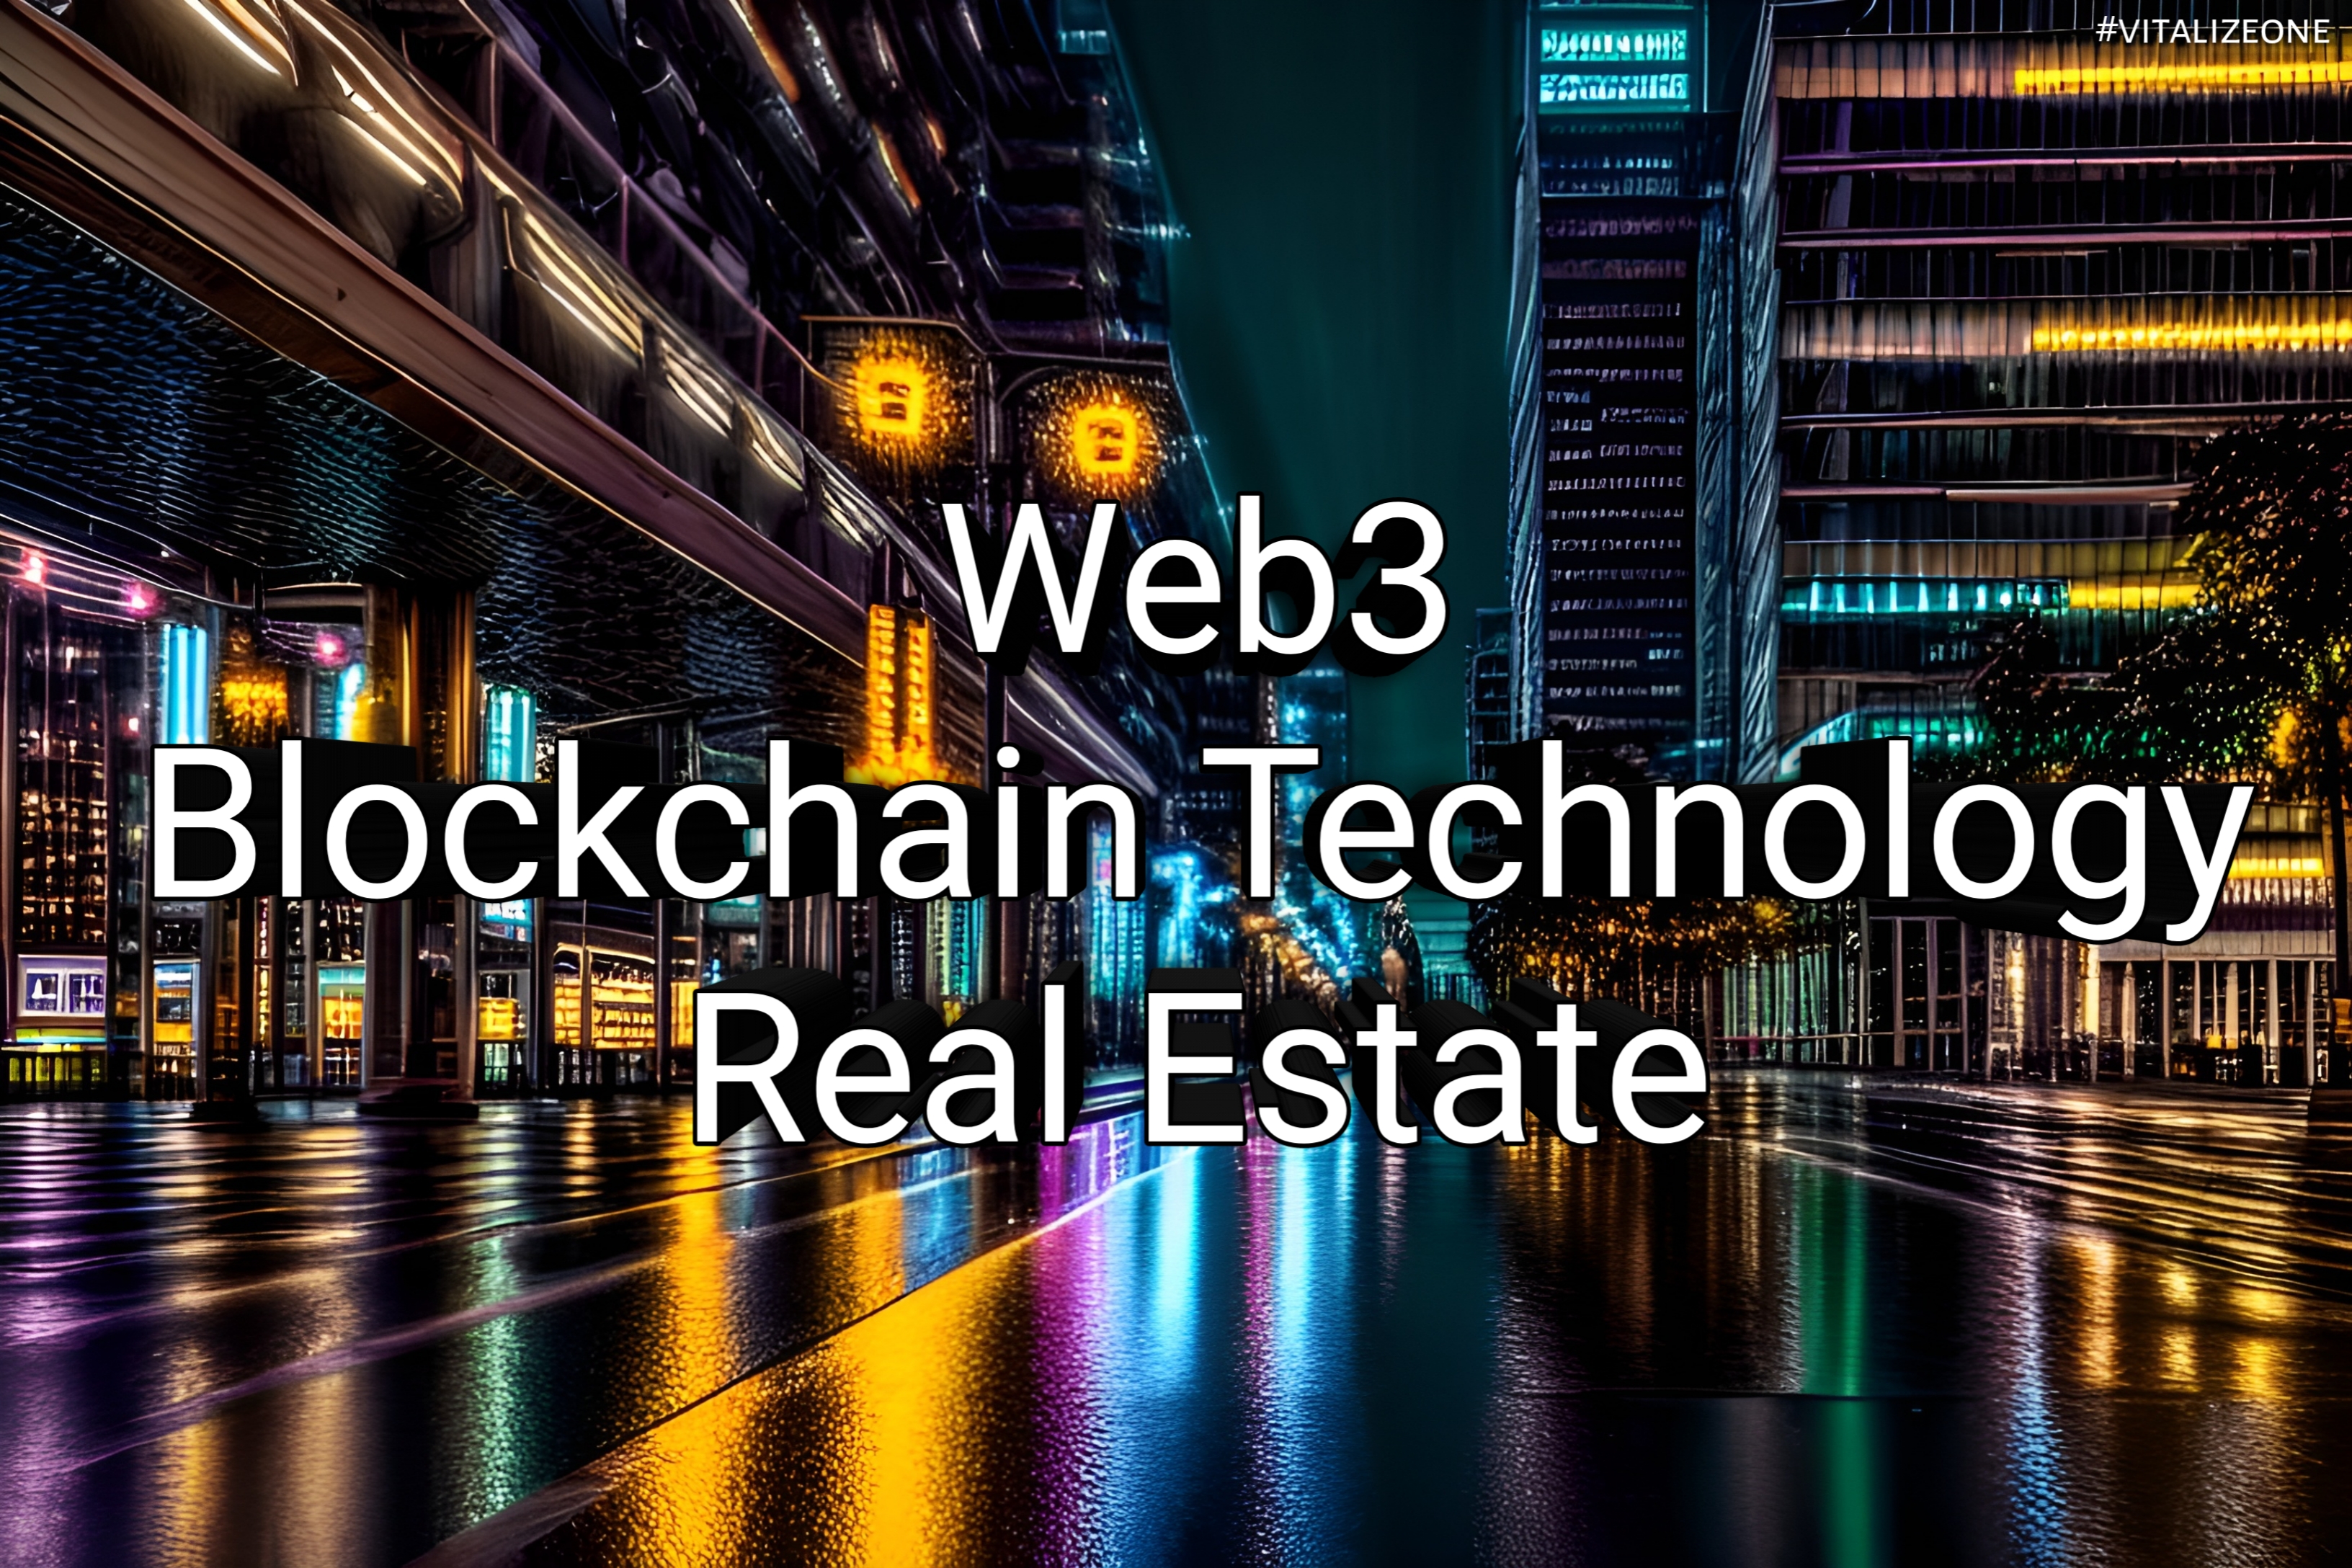 The Power of Web3 and Blockchain Technology in Real Estate | VitalyTennant.com | #vitalizeone 1